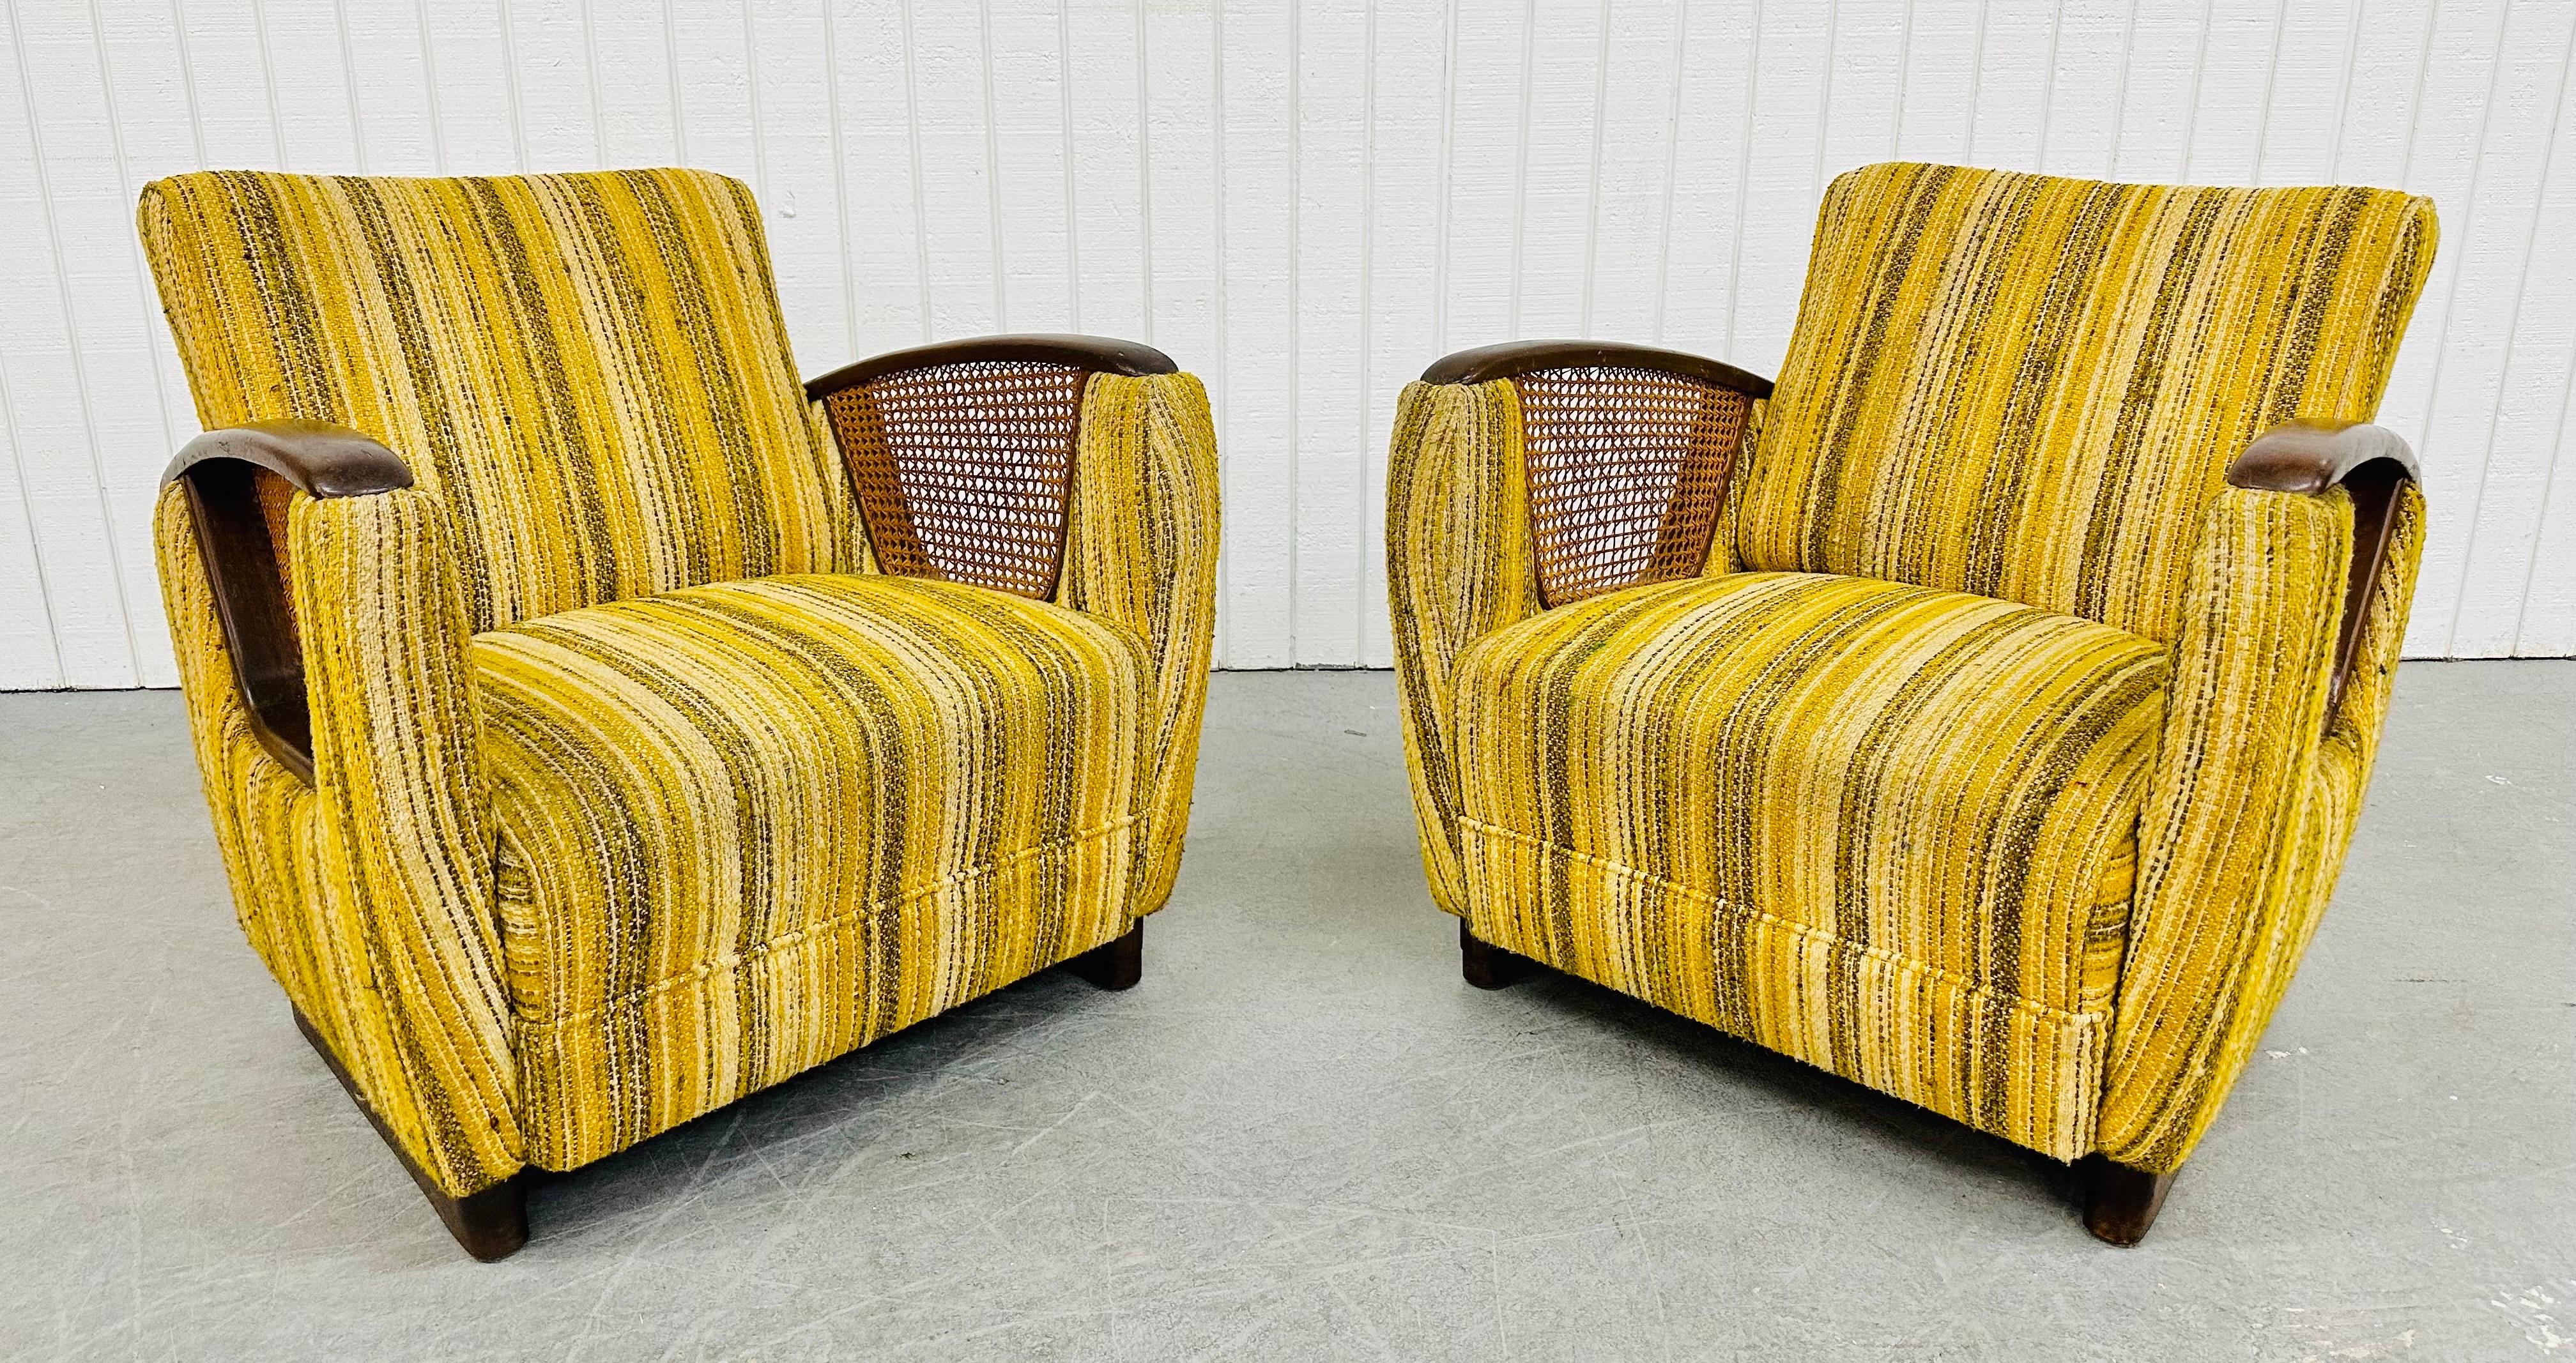 This listing is for a pair of Mid-Century Modern Deco Style Club Chairs. Featuring an Art Deco style design, rounded arms with wooden arm rests, cane sides, original yellow striped upholstery, and modern legs with brass trim. This is an exceptional